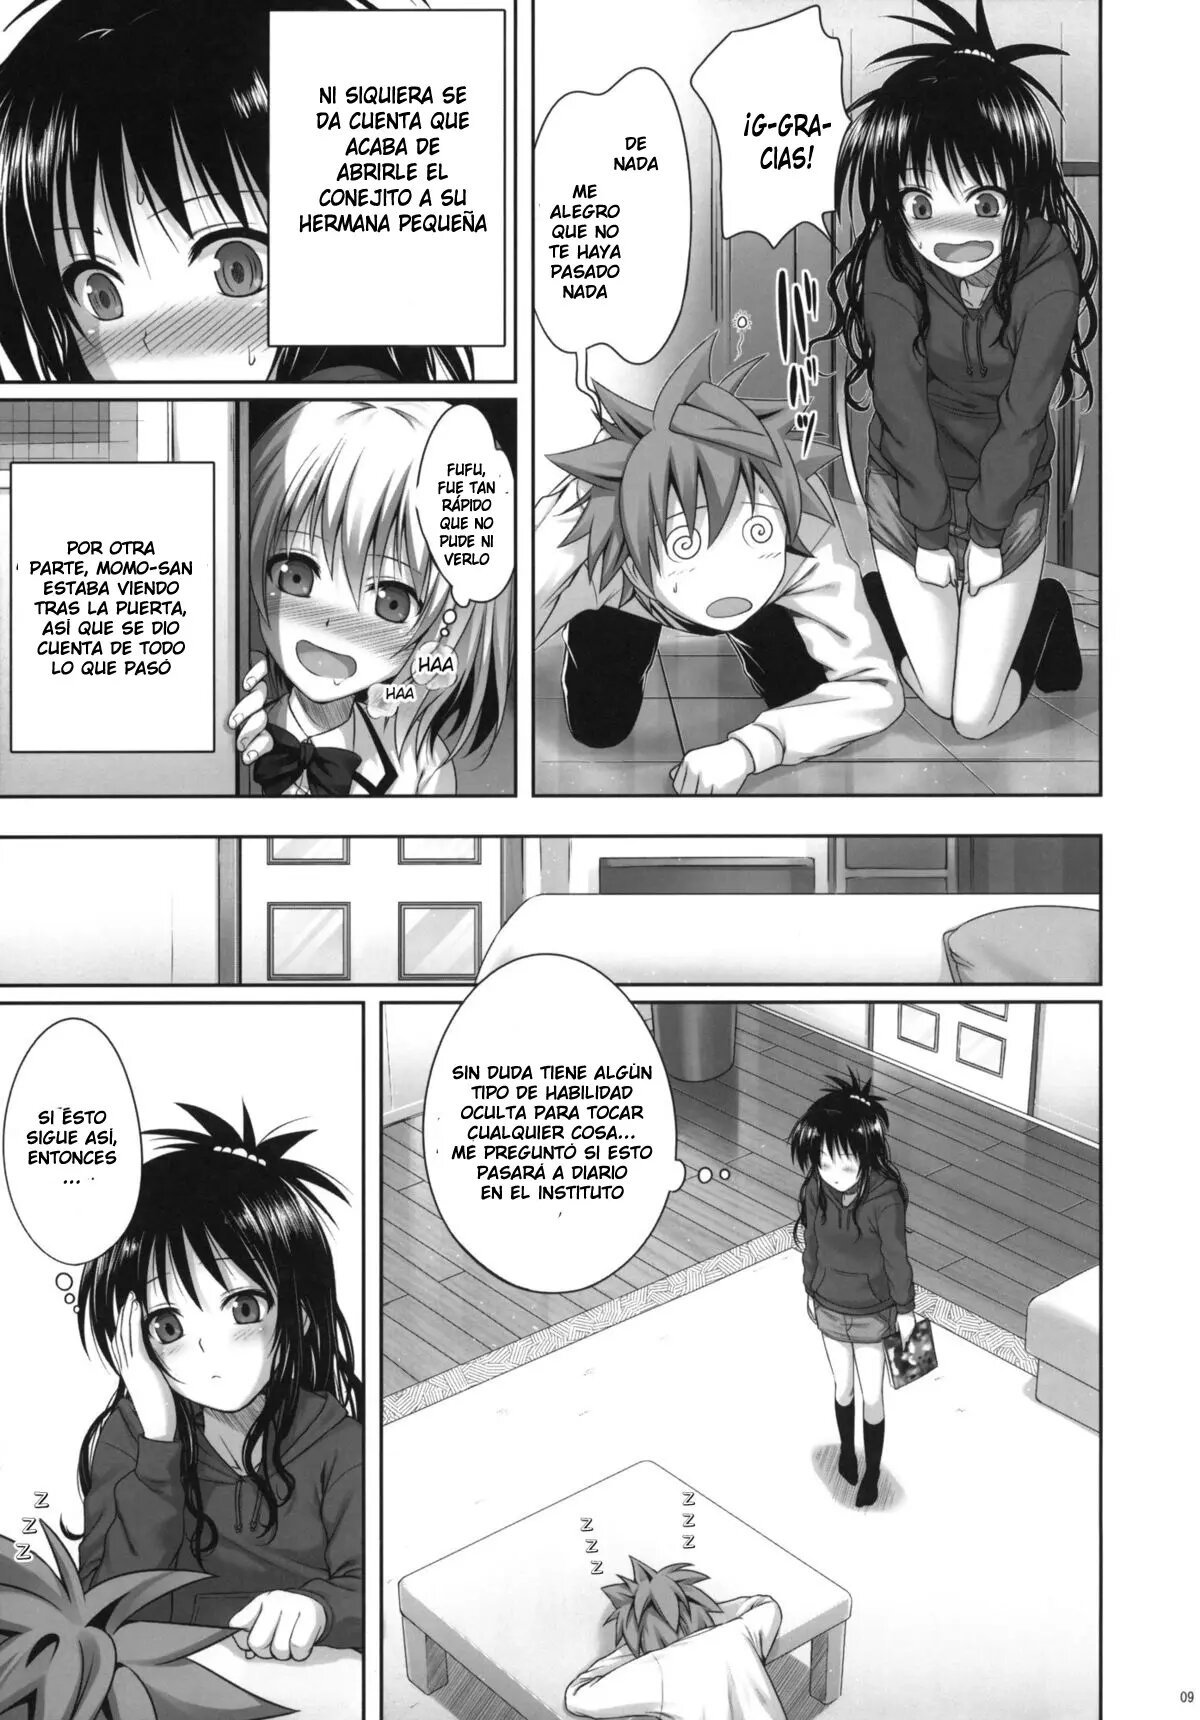 Mikan s delusion and usual days - 7